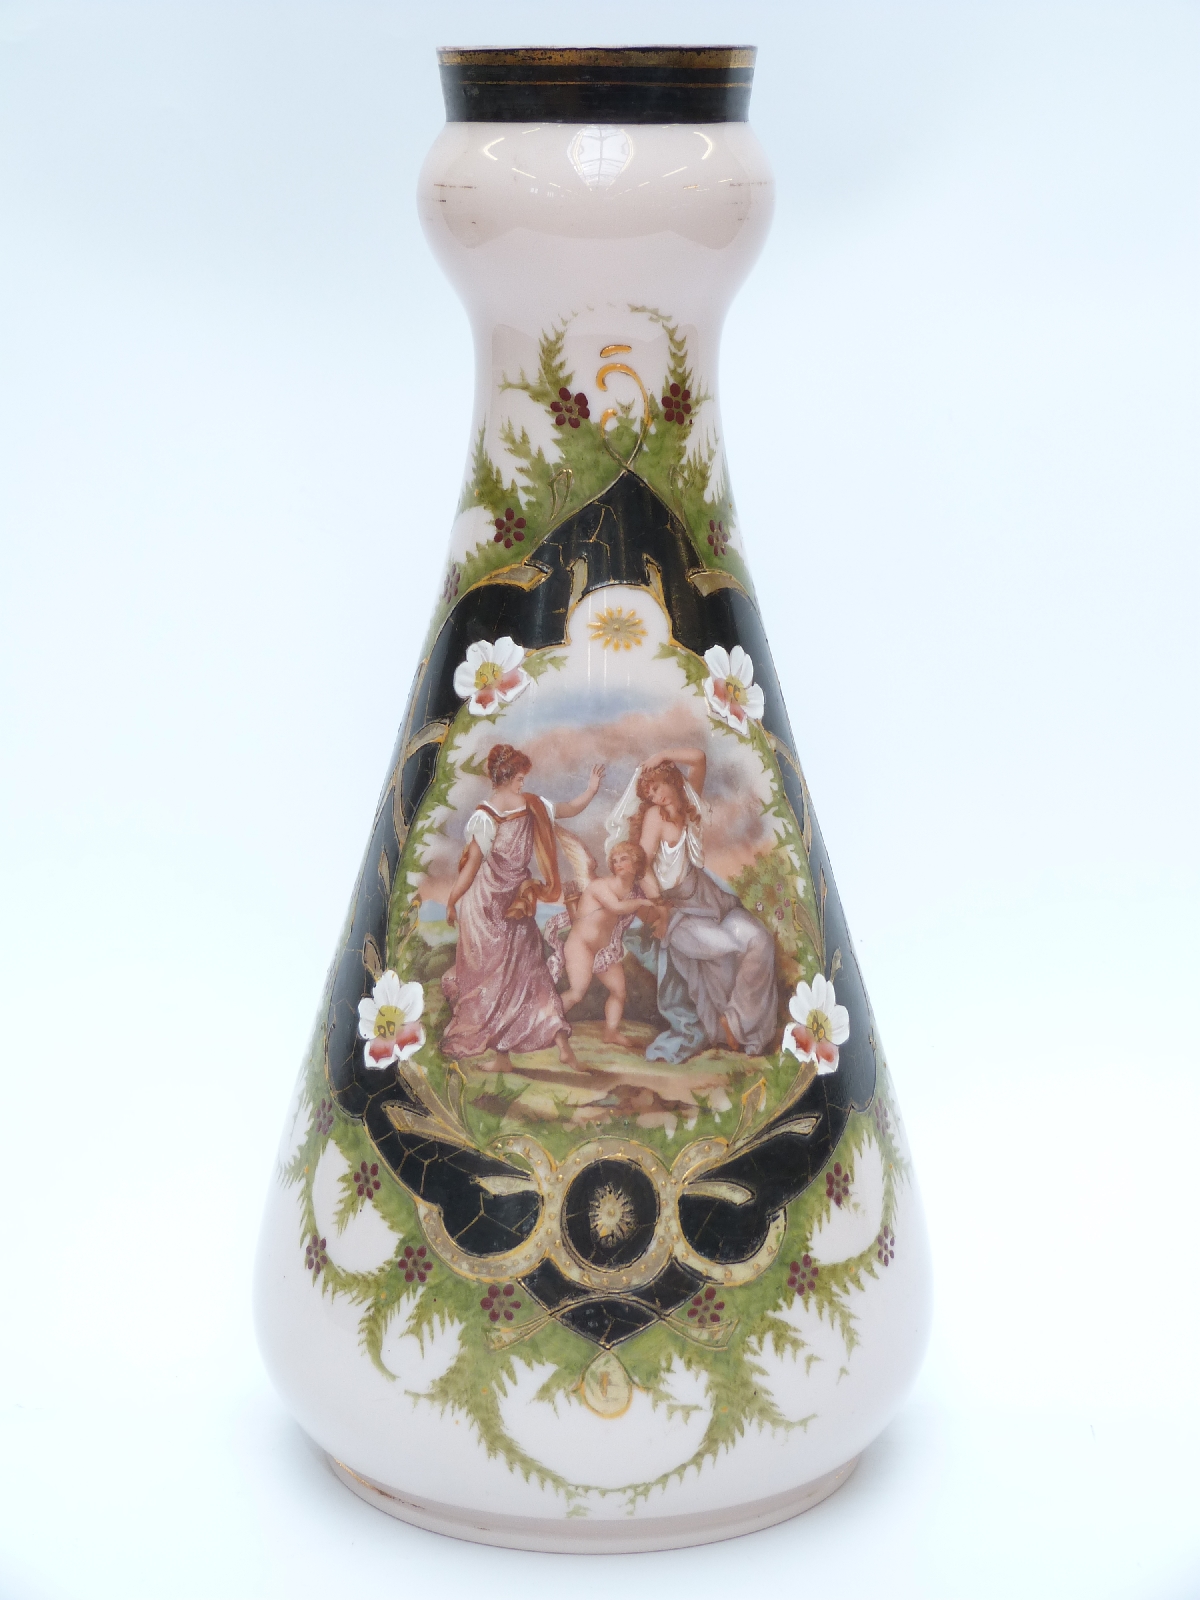 A large glass vase decorated with a scene of ladies and a cherub in a landscape setting surrounded